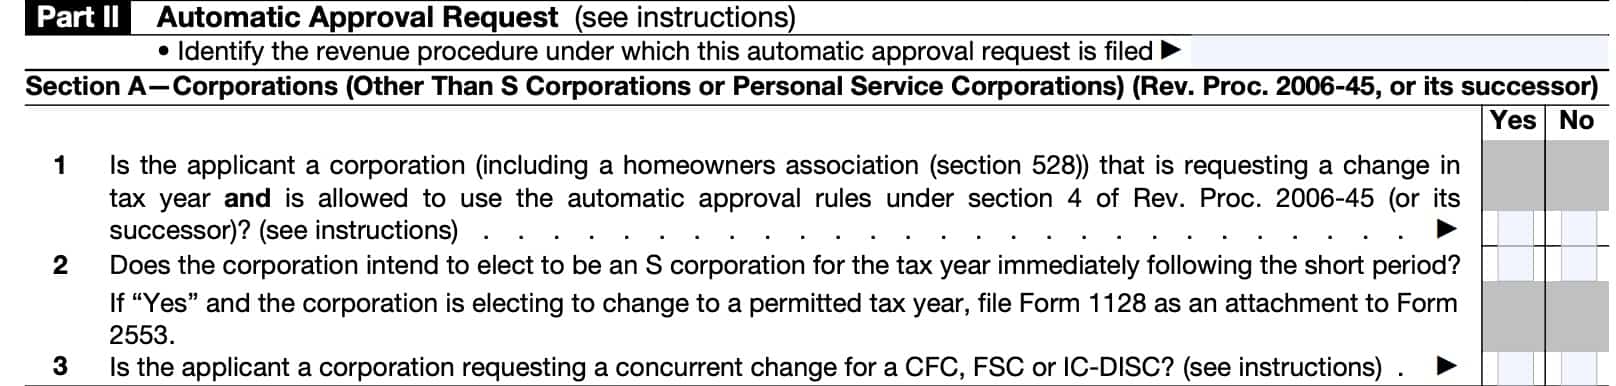 irs form 1128, part ii, section a, corporations